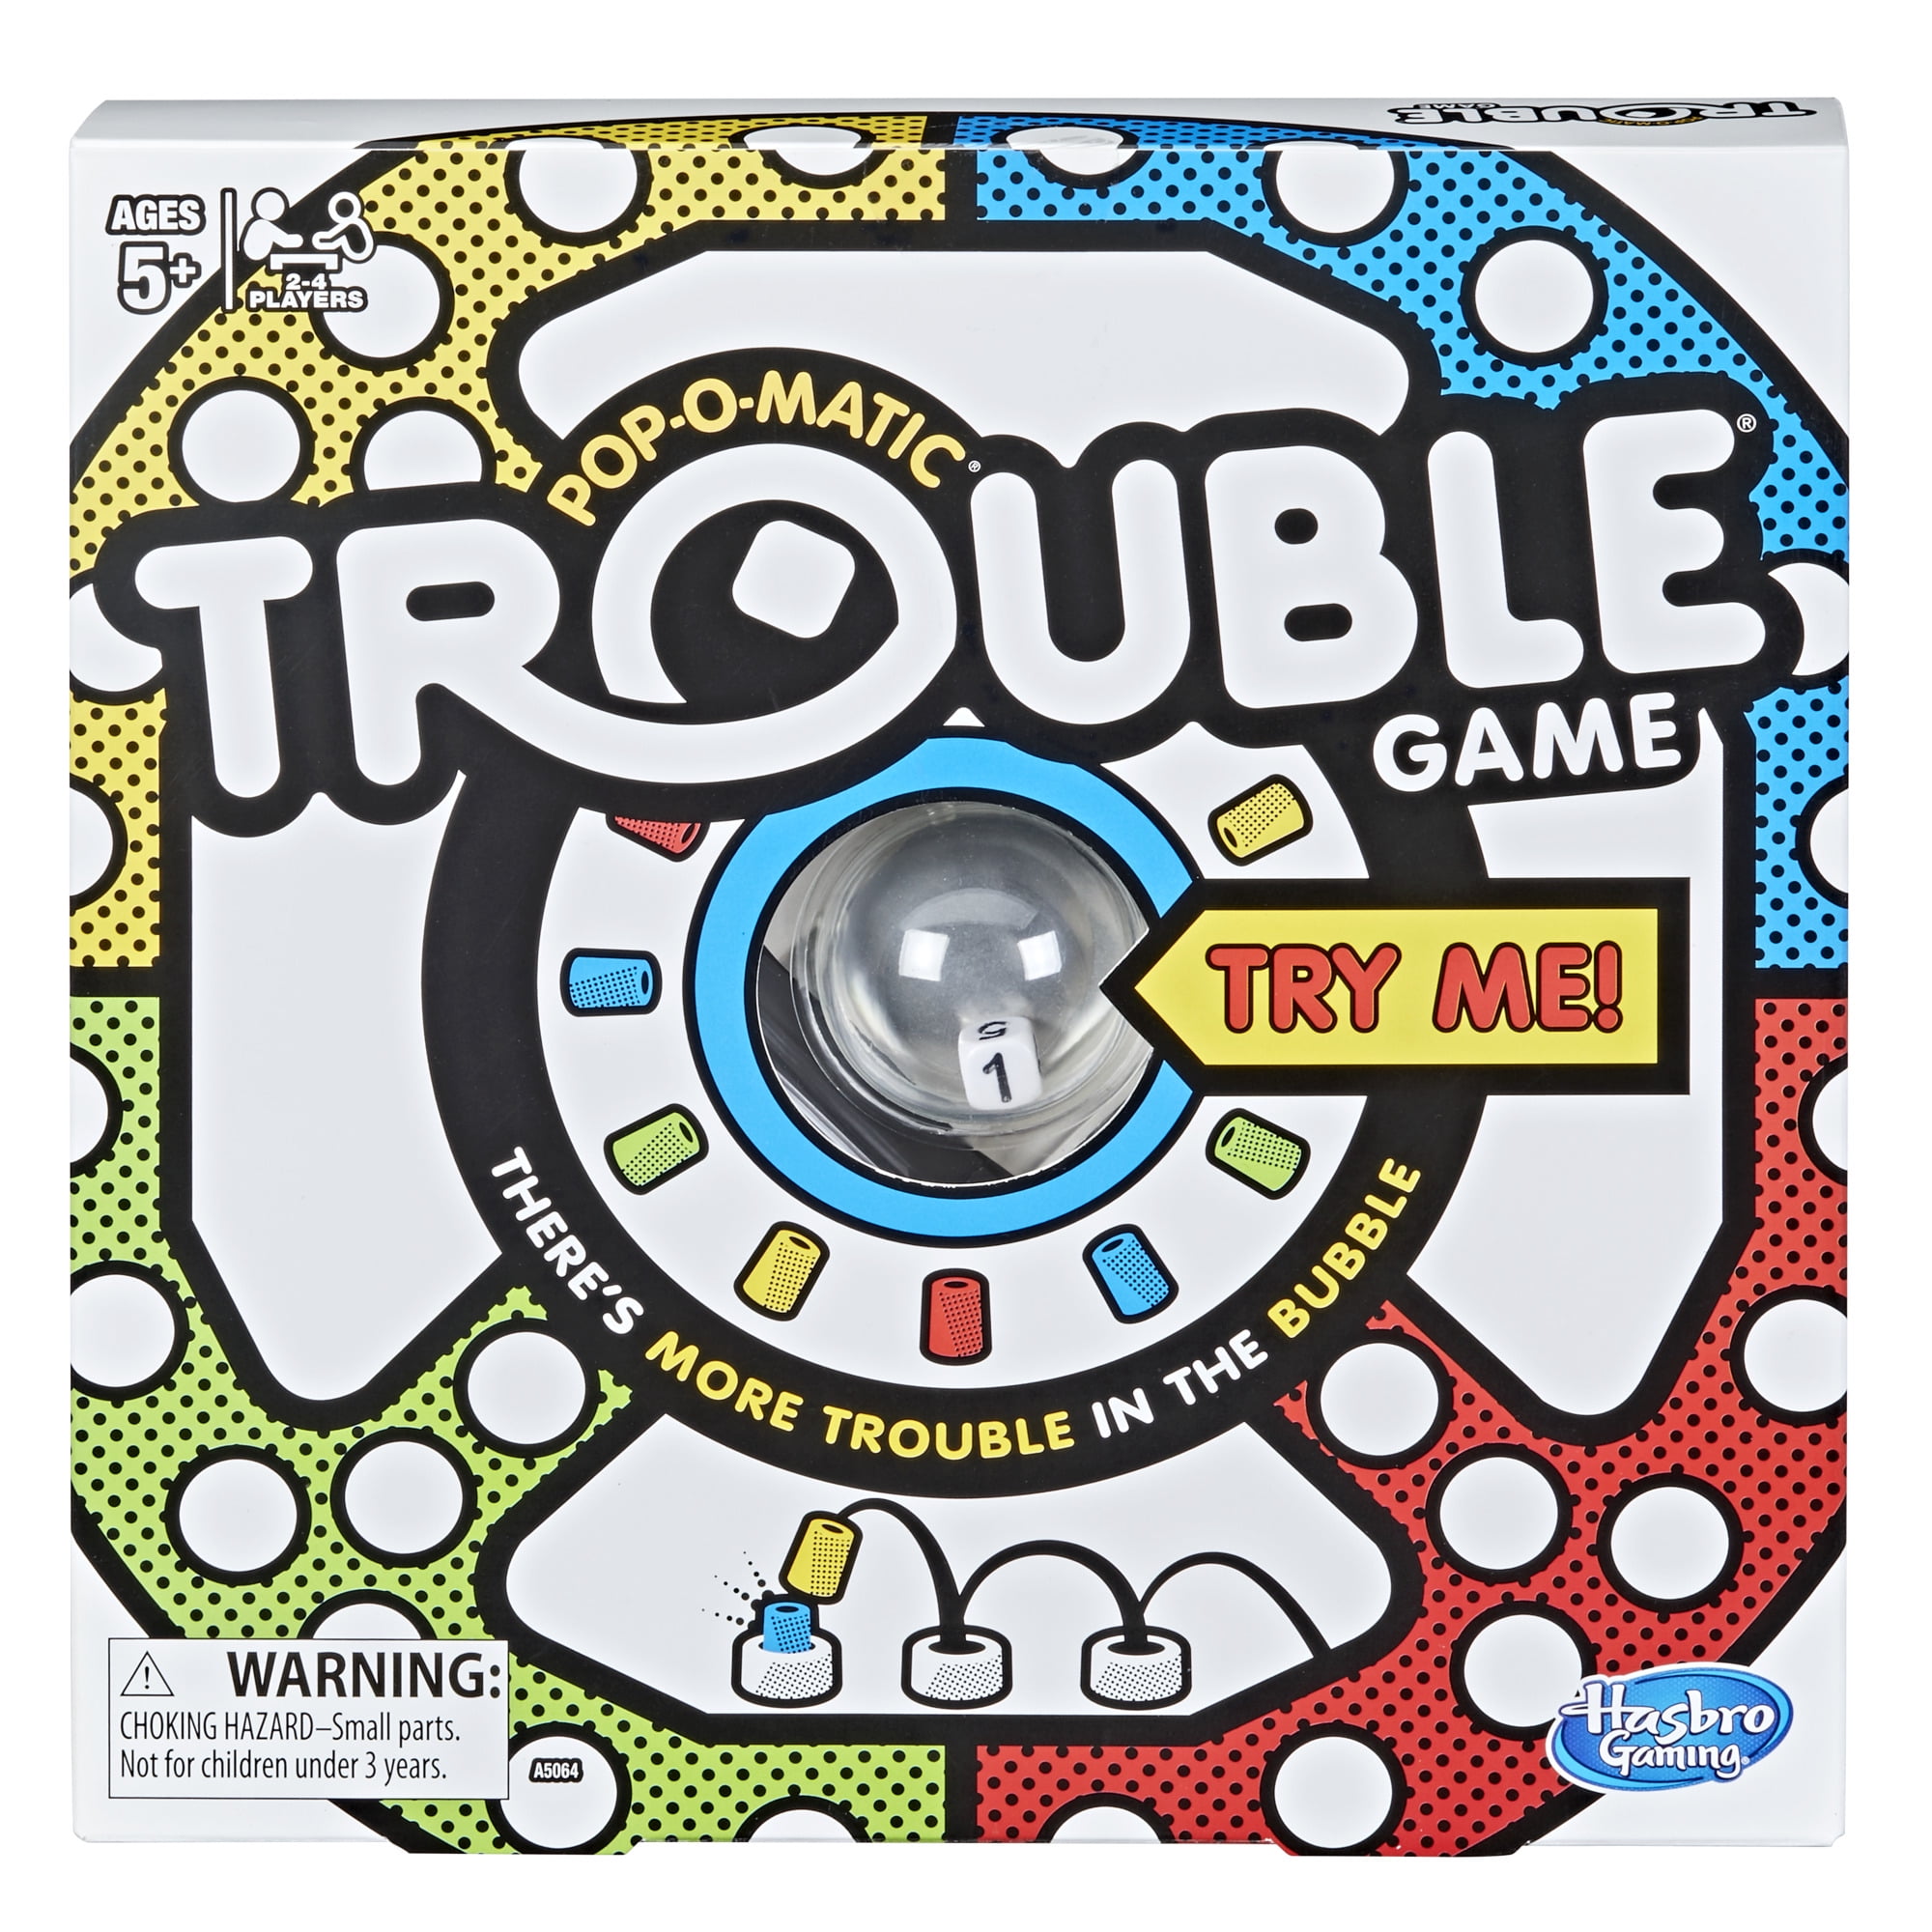 Hasbro Trouble Board Game, Board Game for 2 to 4 Players, for Kids Ages 5 and Up